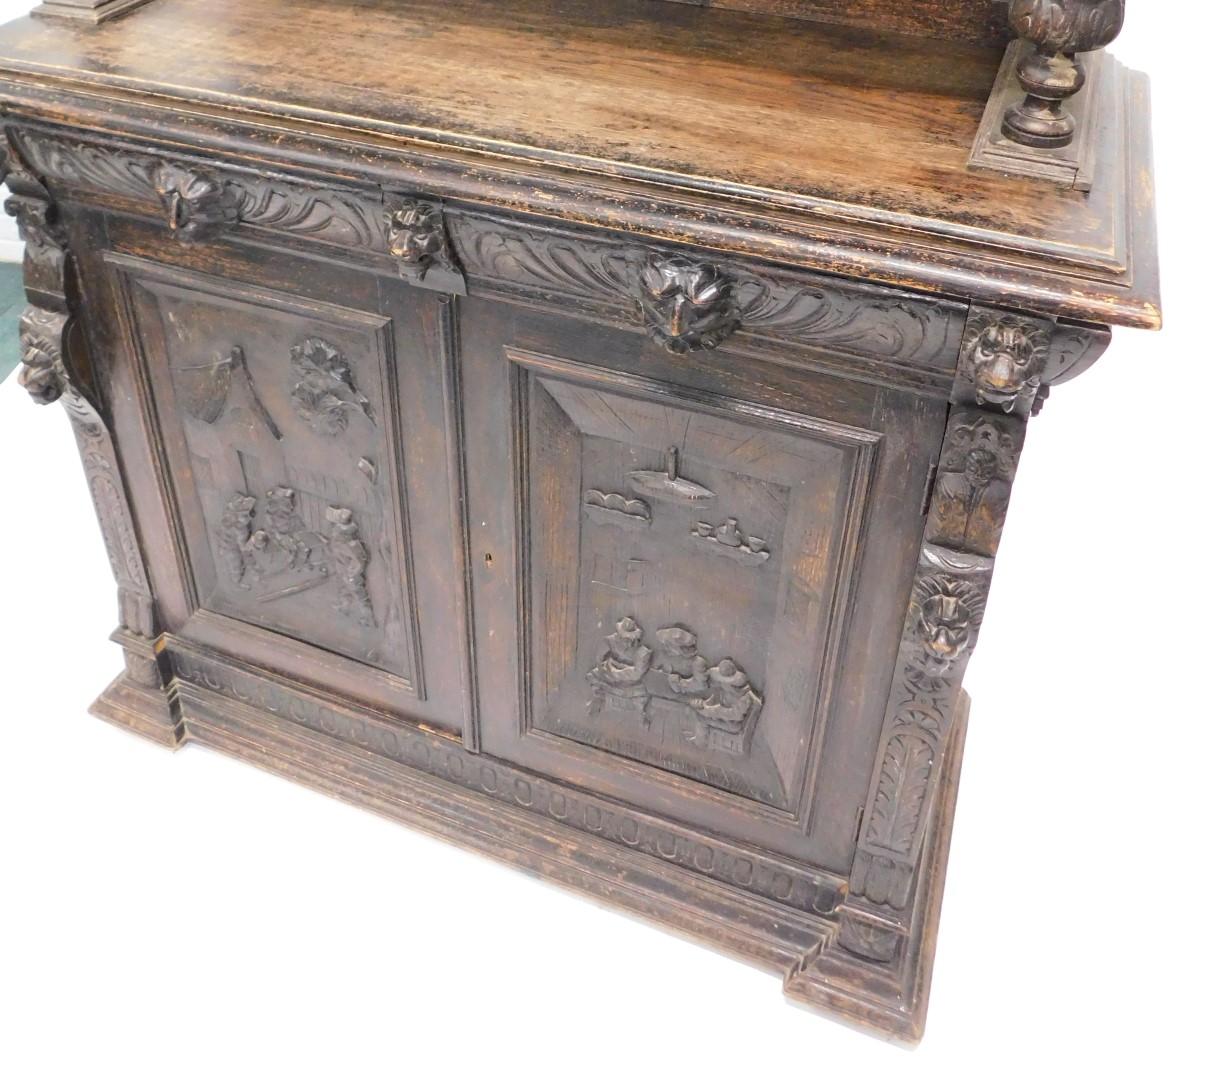 A late 19thC Flemish style ebonised oak cabinet, the top with a moulded cornice above gadrooned frie - Image 2 of 6